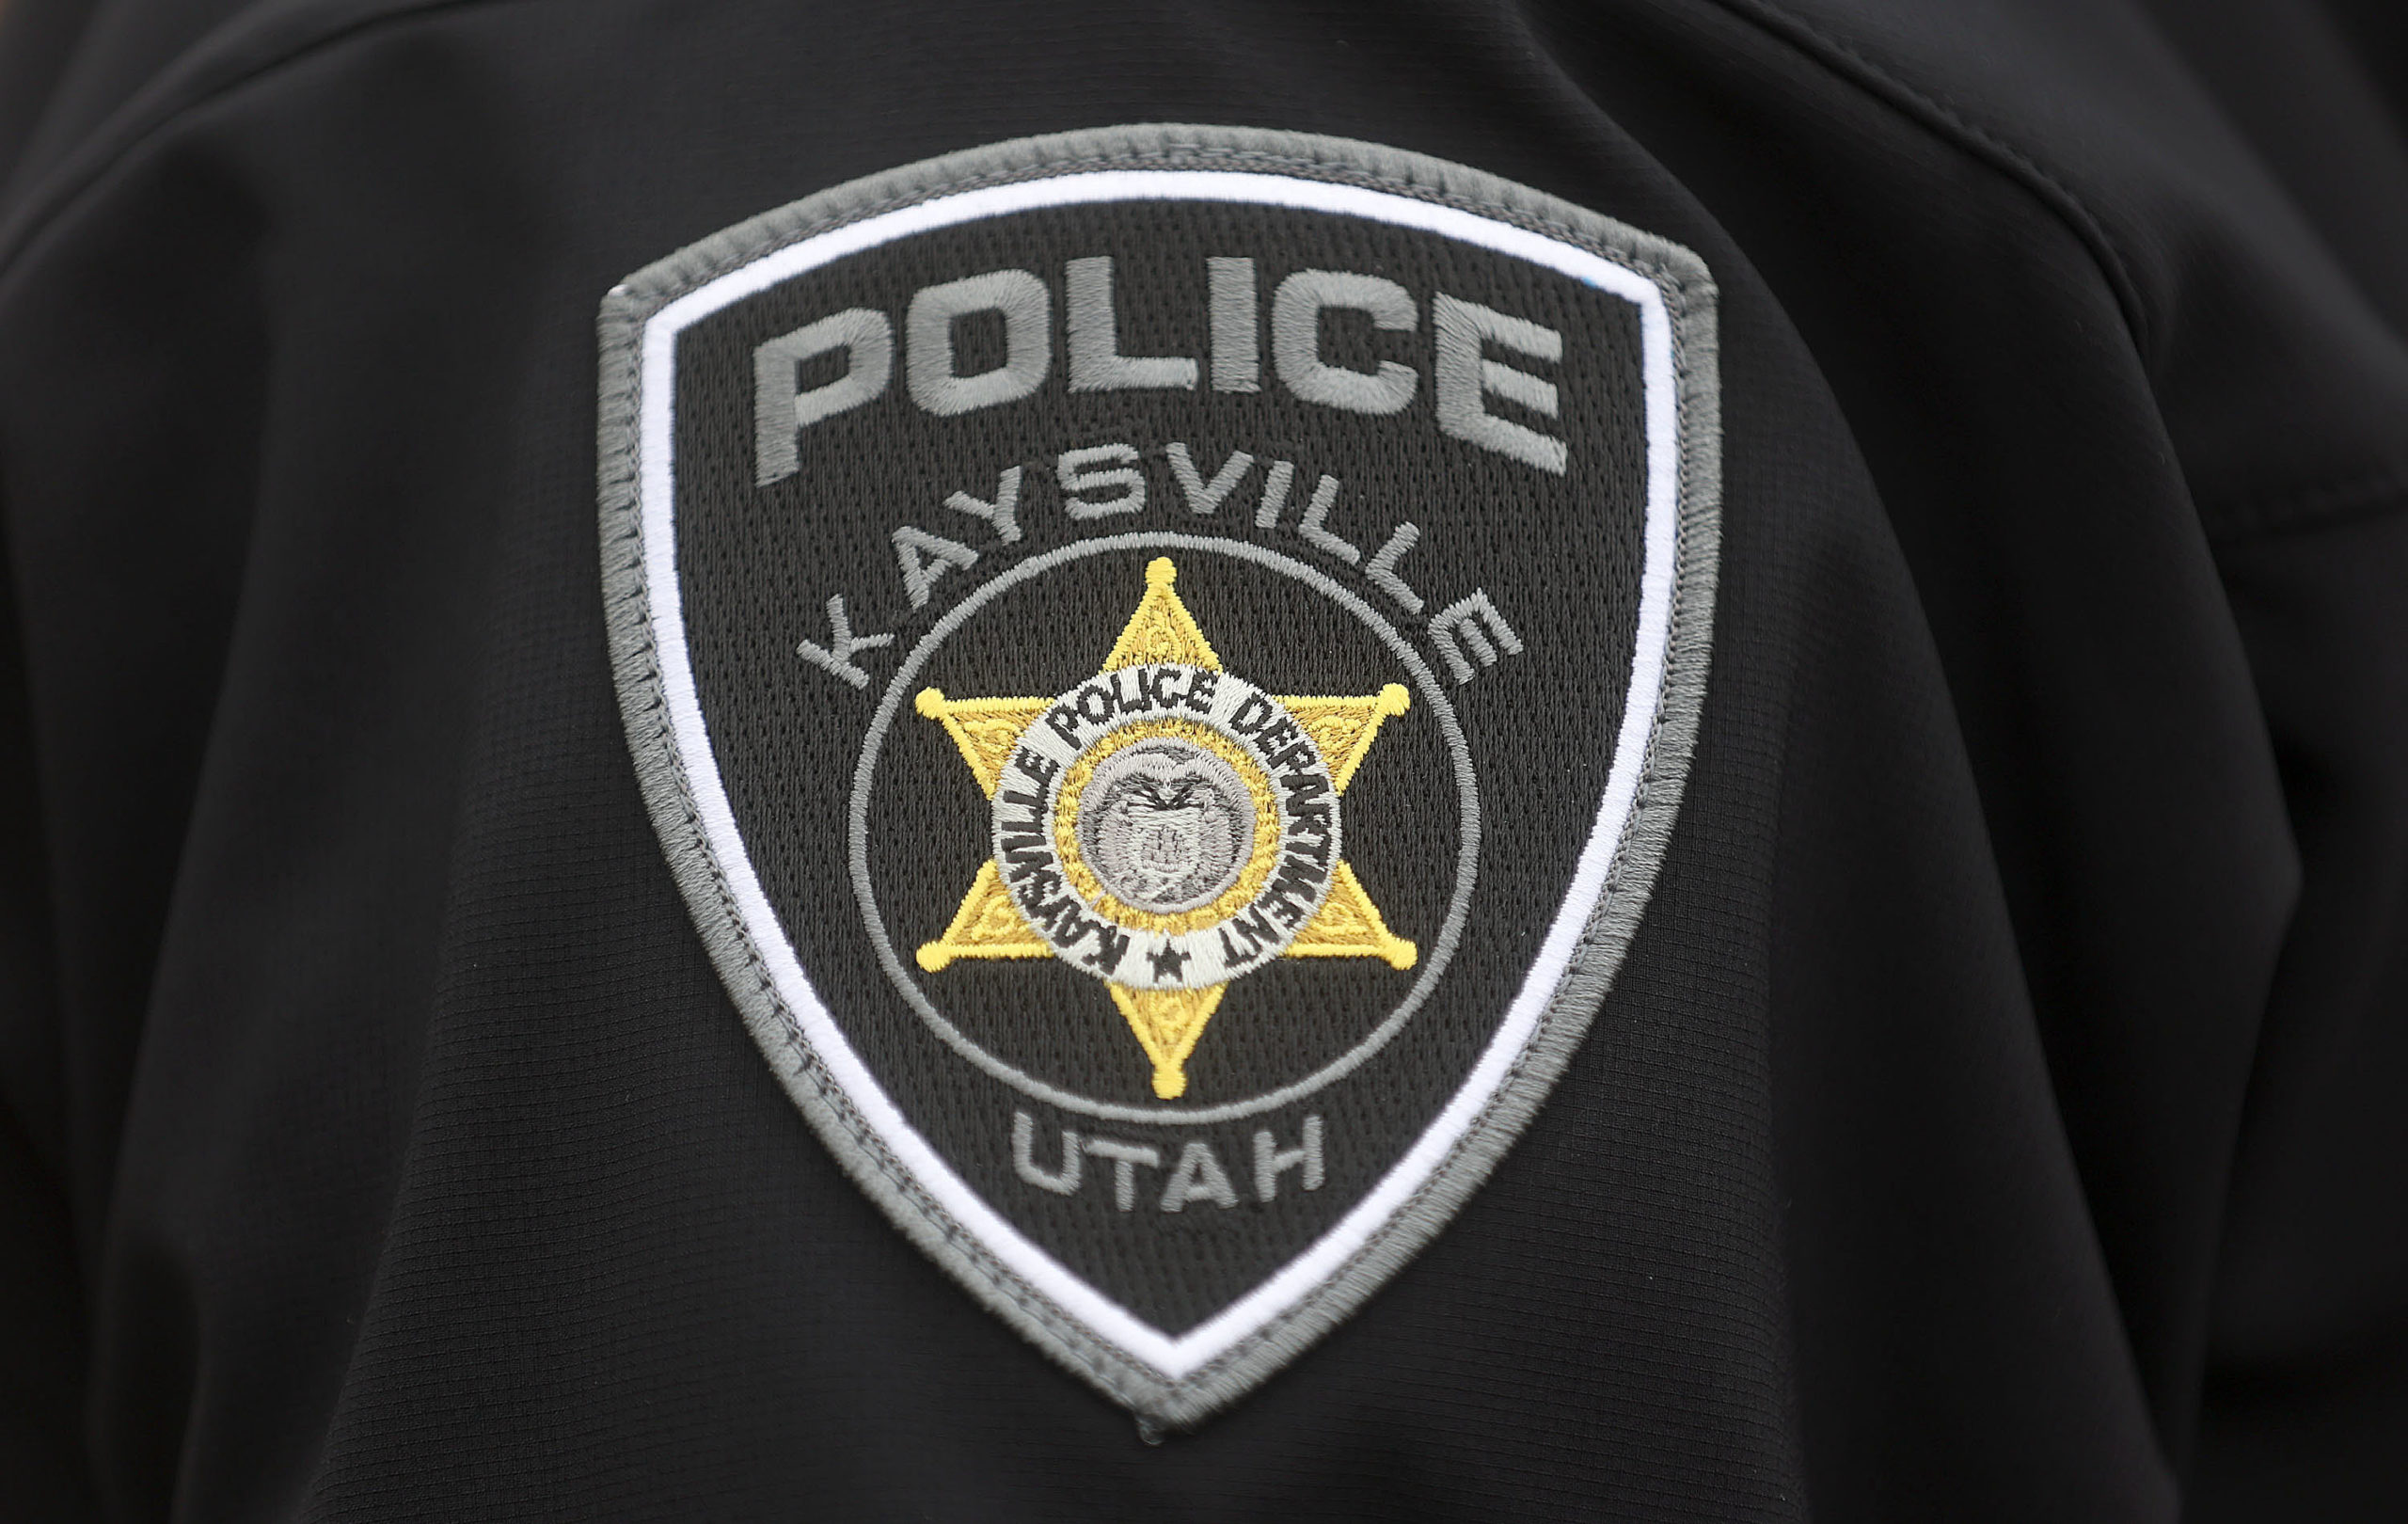 A Kaysville police uniform is pictured in Kaysville on Friday, Feb. 19, 2021....